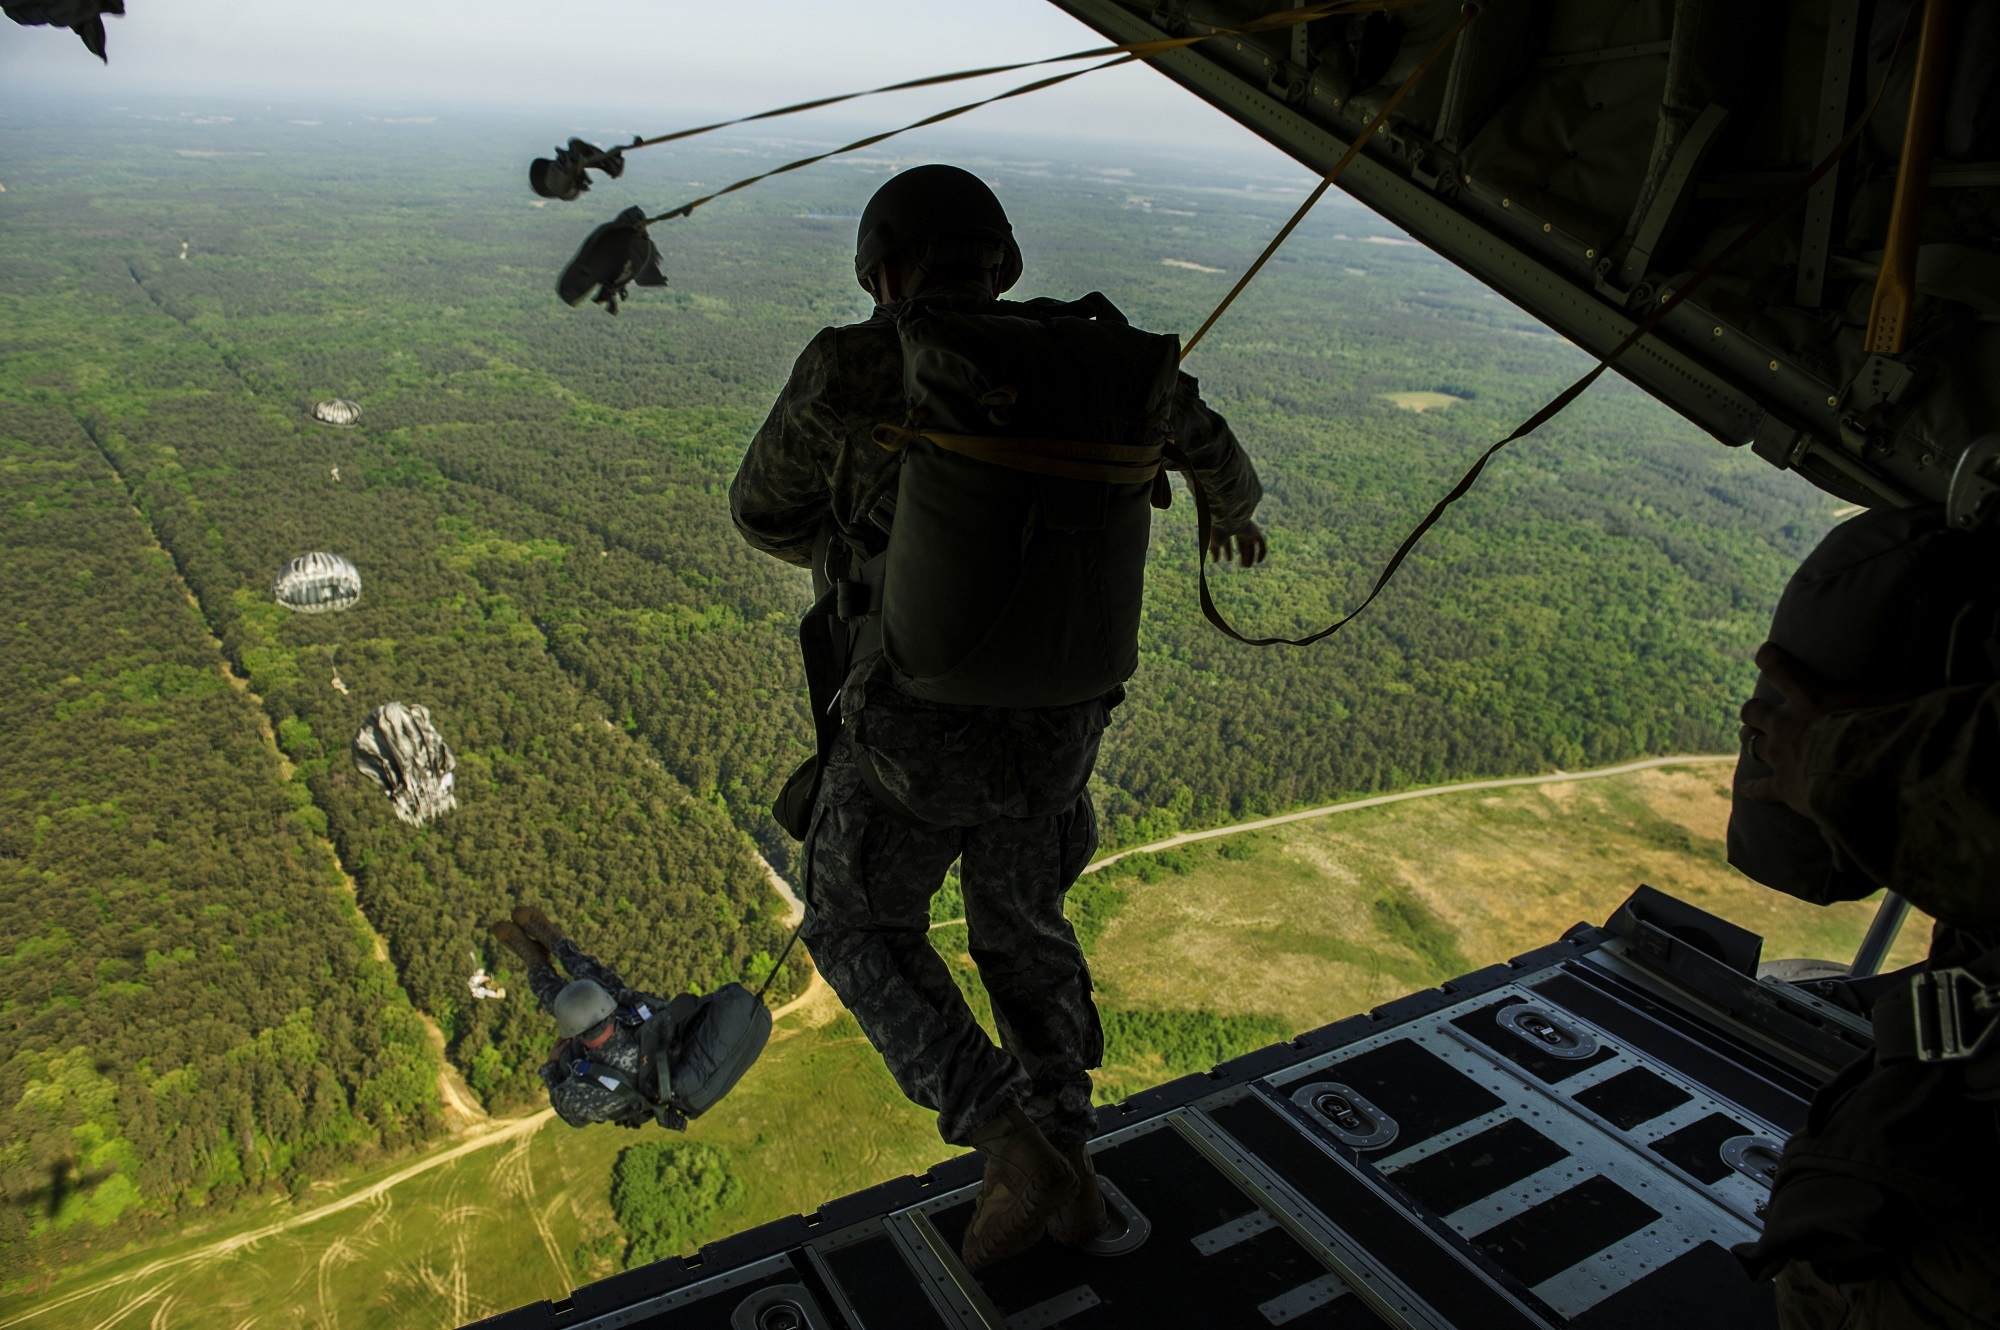 military, paratrooper, air force, aircraft, parachuting, soldier